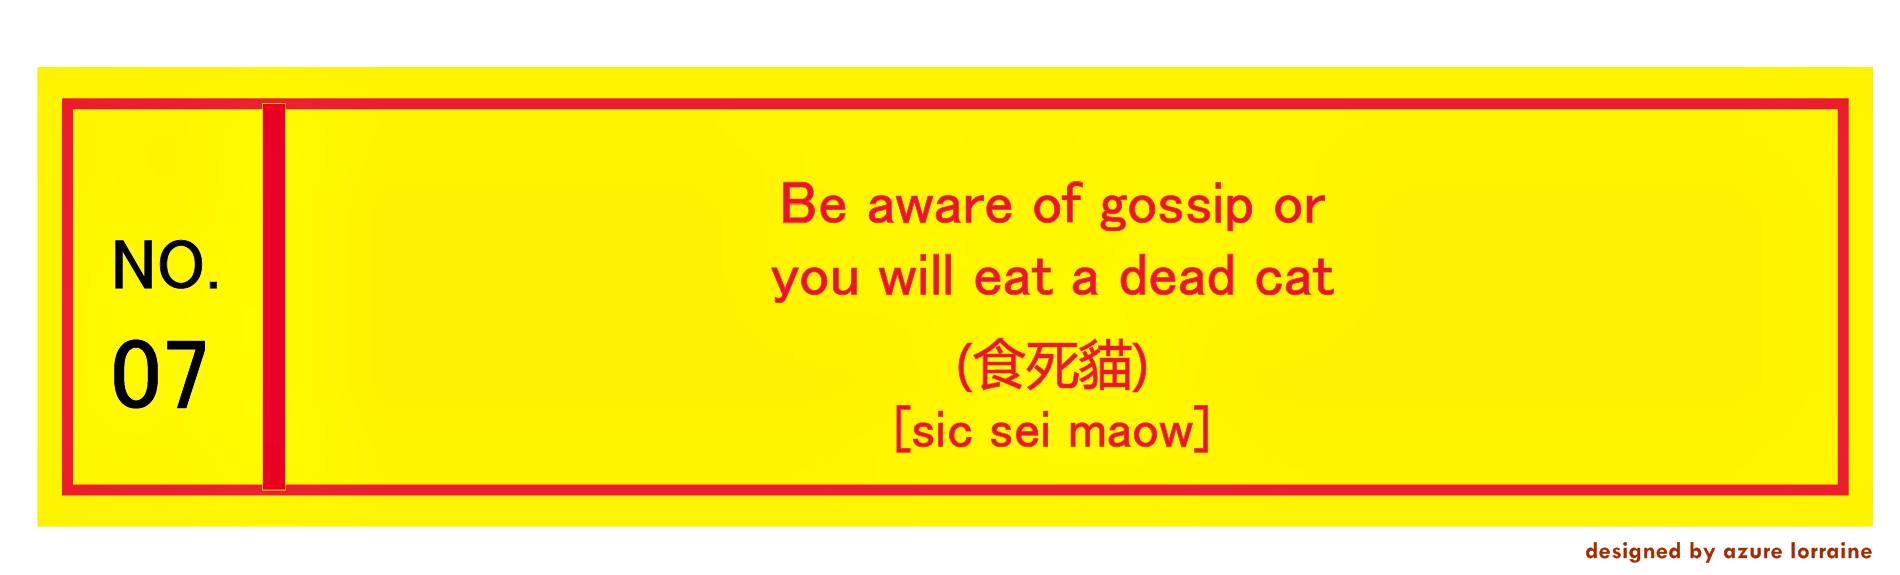 7. Be aware of gossip or you will eat a dead cat.(食死貓) [sic séi maow]